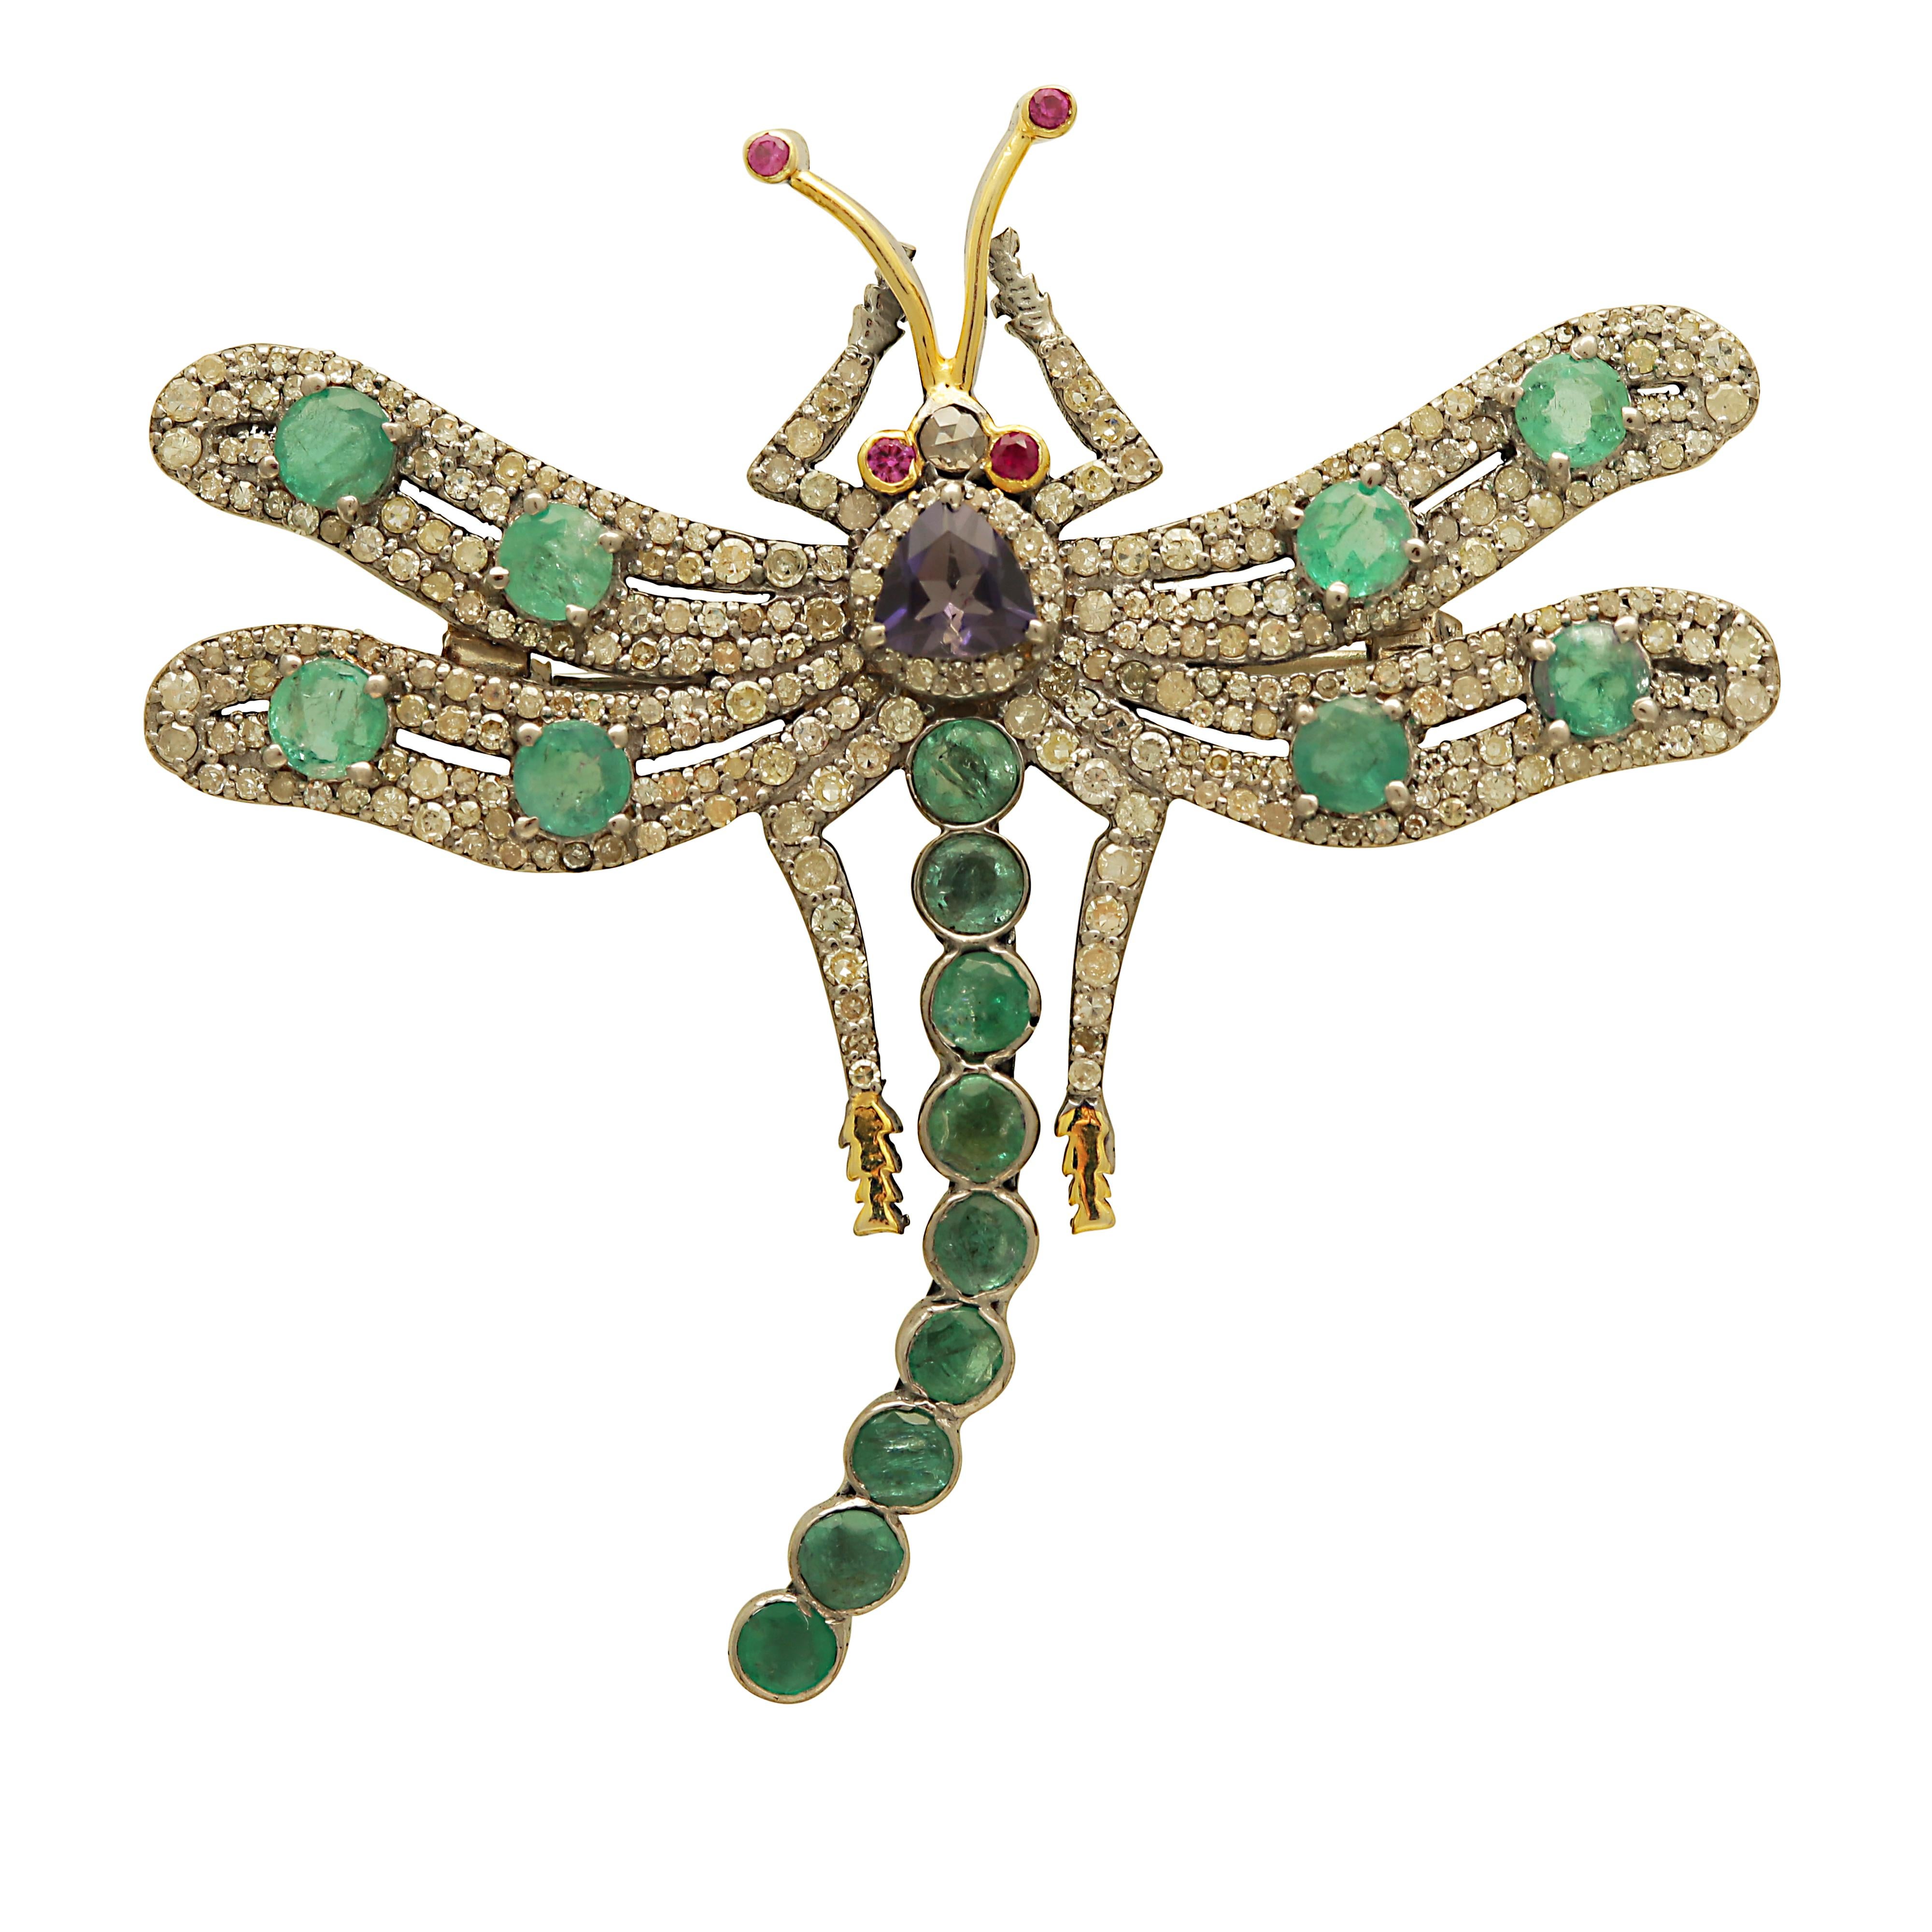 Victorian Inspired Dragonfly Brooch/Pendant with Diamond, Emerald & Iolite